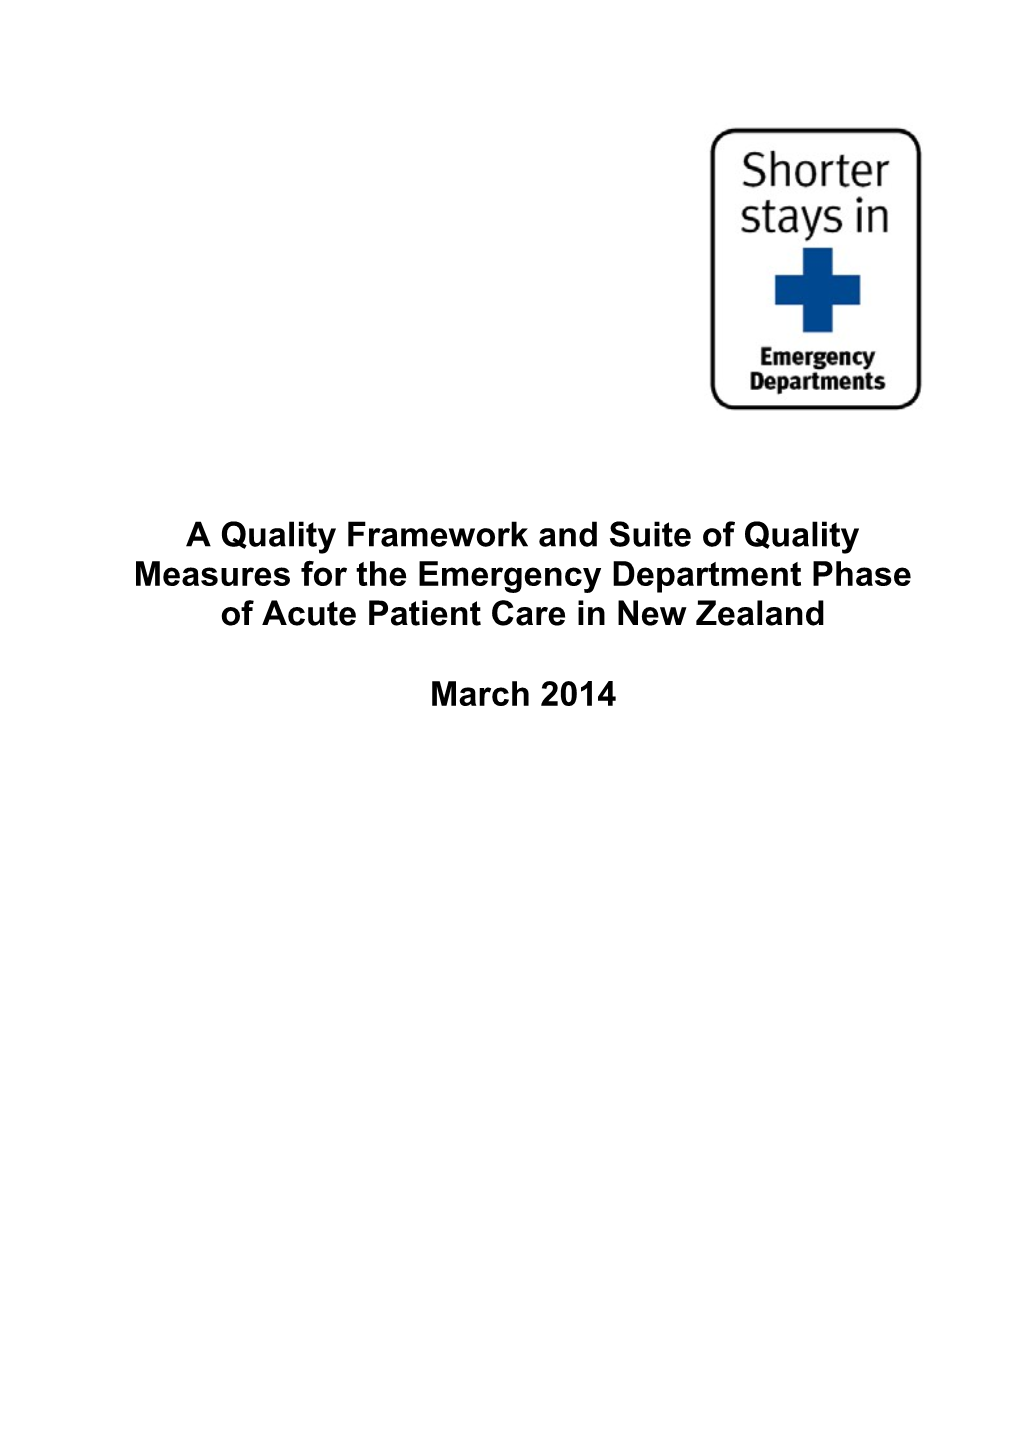 A Quality Framework and Suite of Quality Measures for the Emergency Department Phase Of